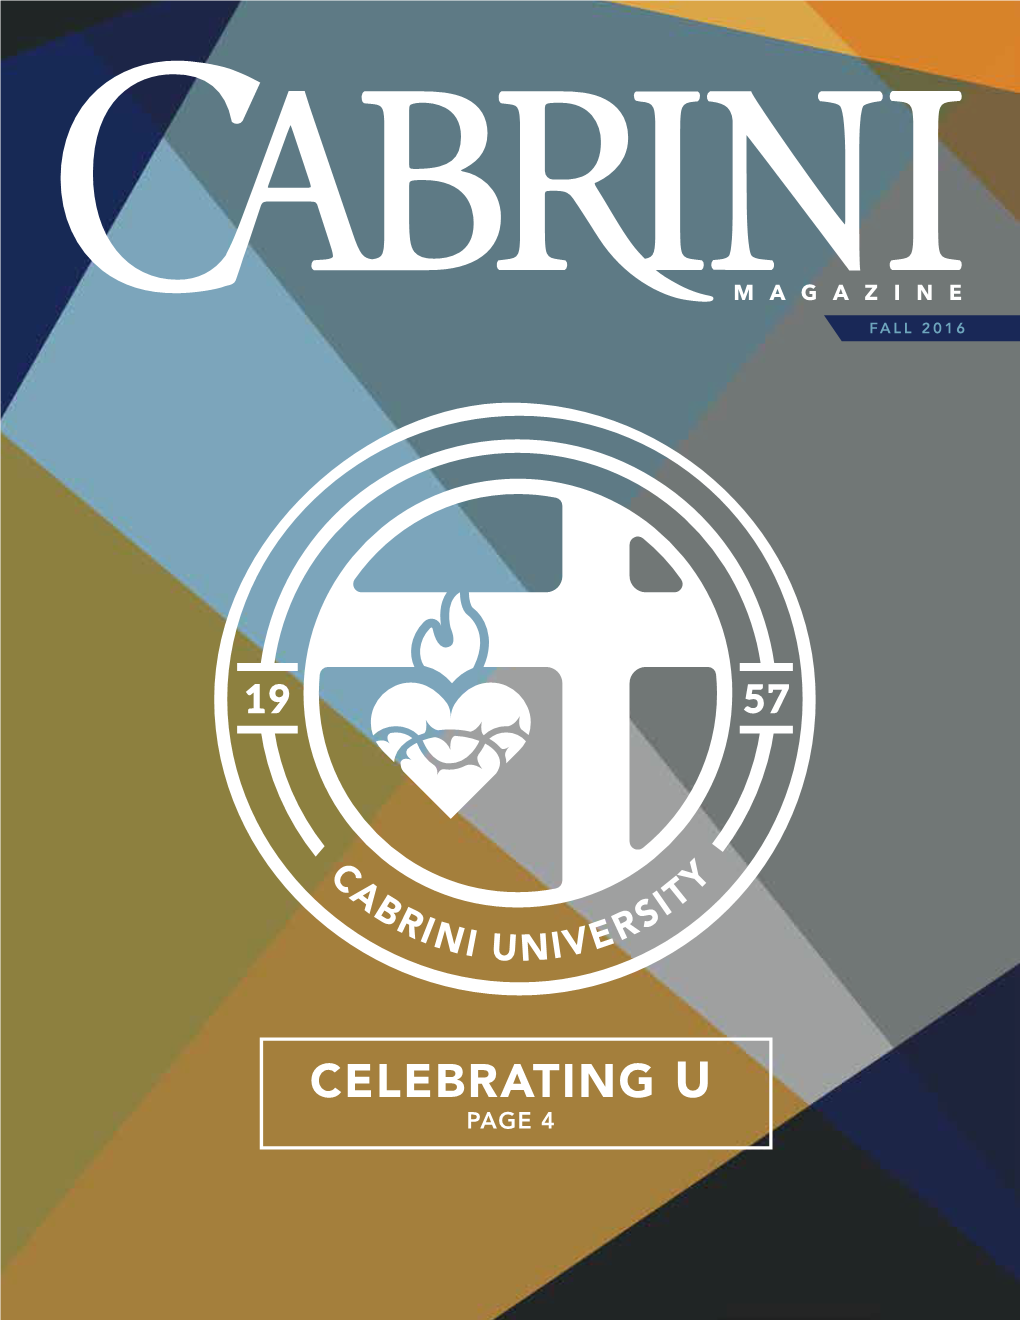 CELEBRATING U PAGE 4 CABRINI MAGAZINE TABLE of CONTENTS Is Published by the Marketing and Communications Office